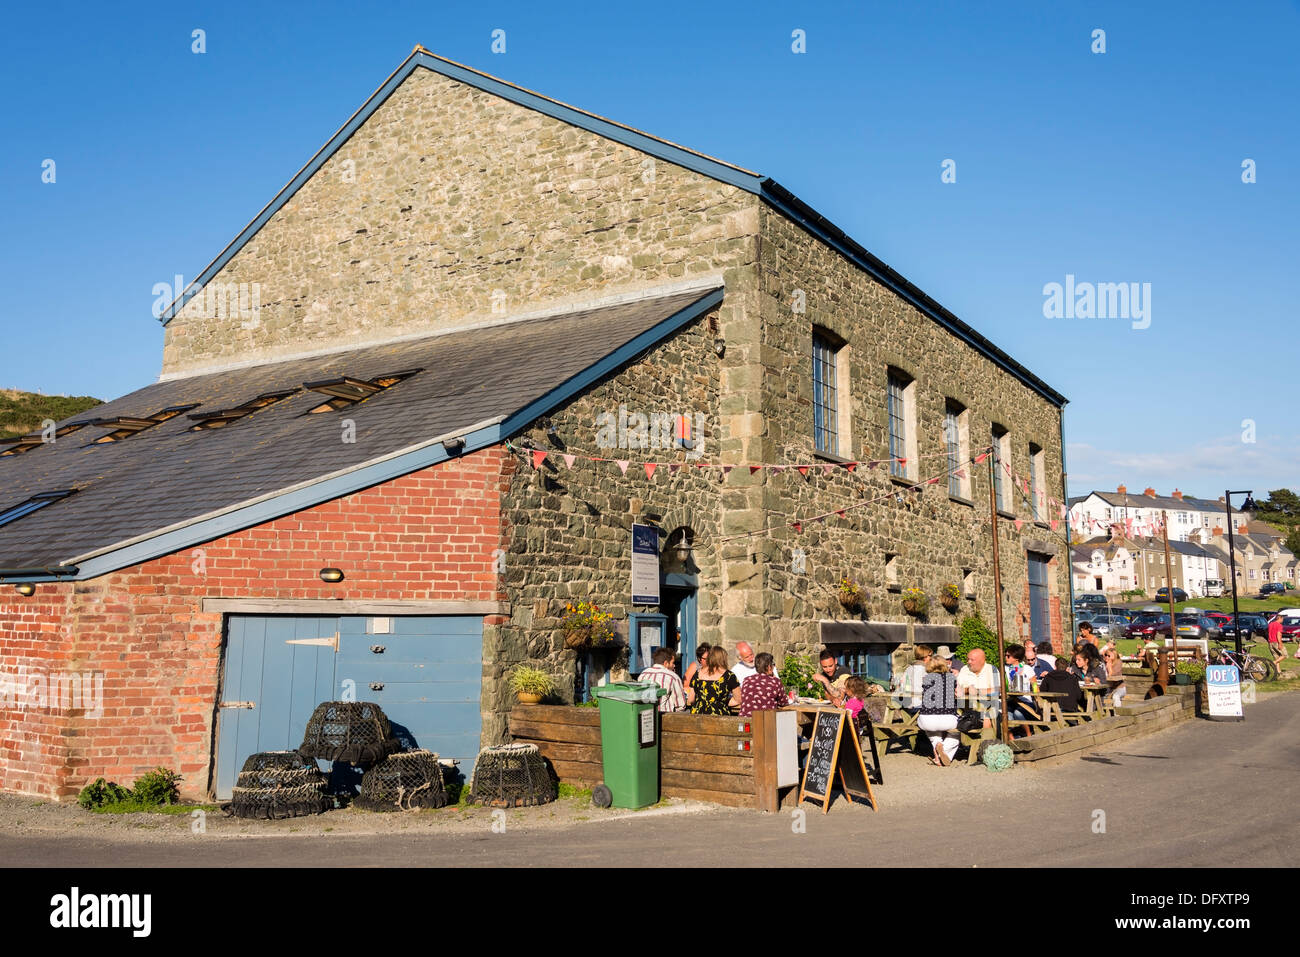 The Shed, seafood bistro, Porthgain, Pembrokeshire, Wales. Stock Photo